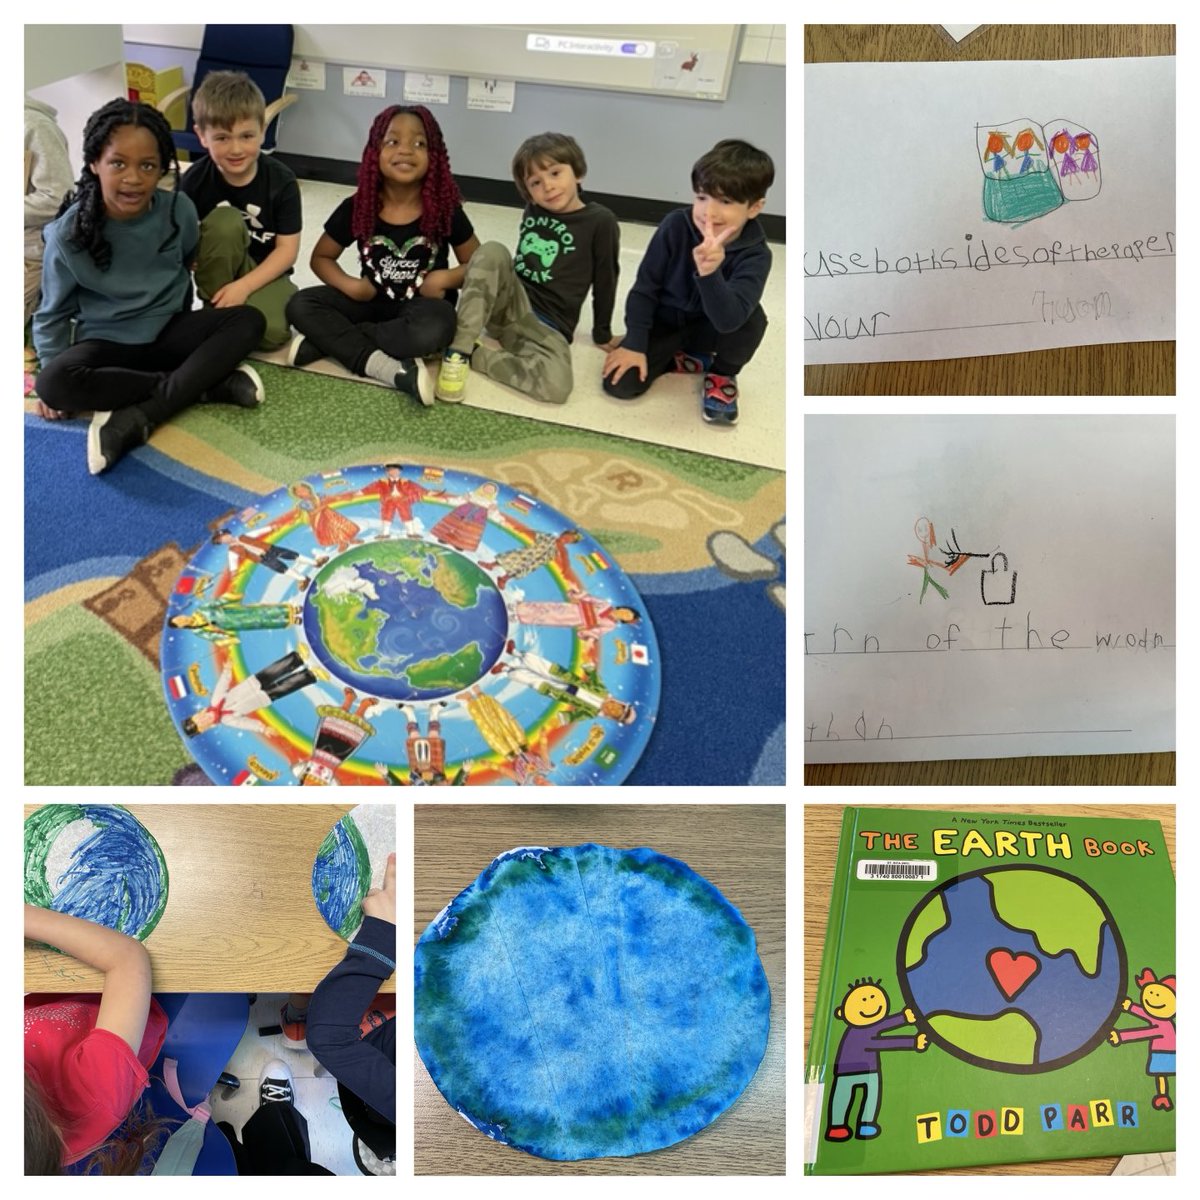 After reading “The Earth Book”, the students talked about different ways they can help the planet Earth. ⁦@StRitaOCSB⁩